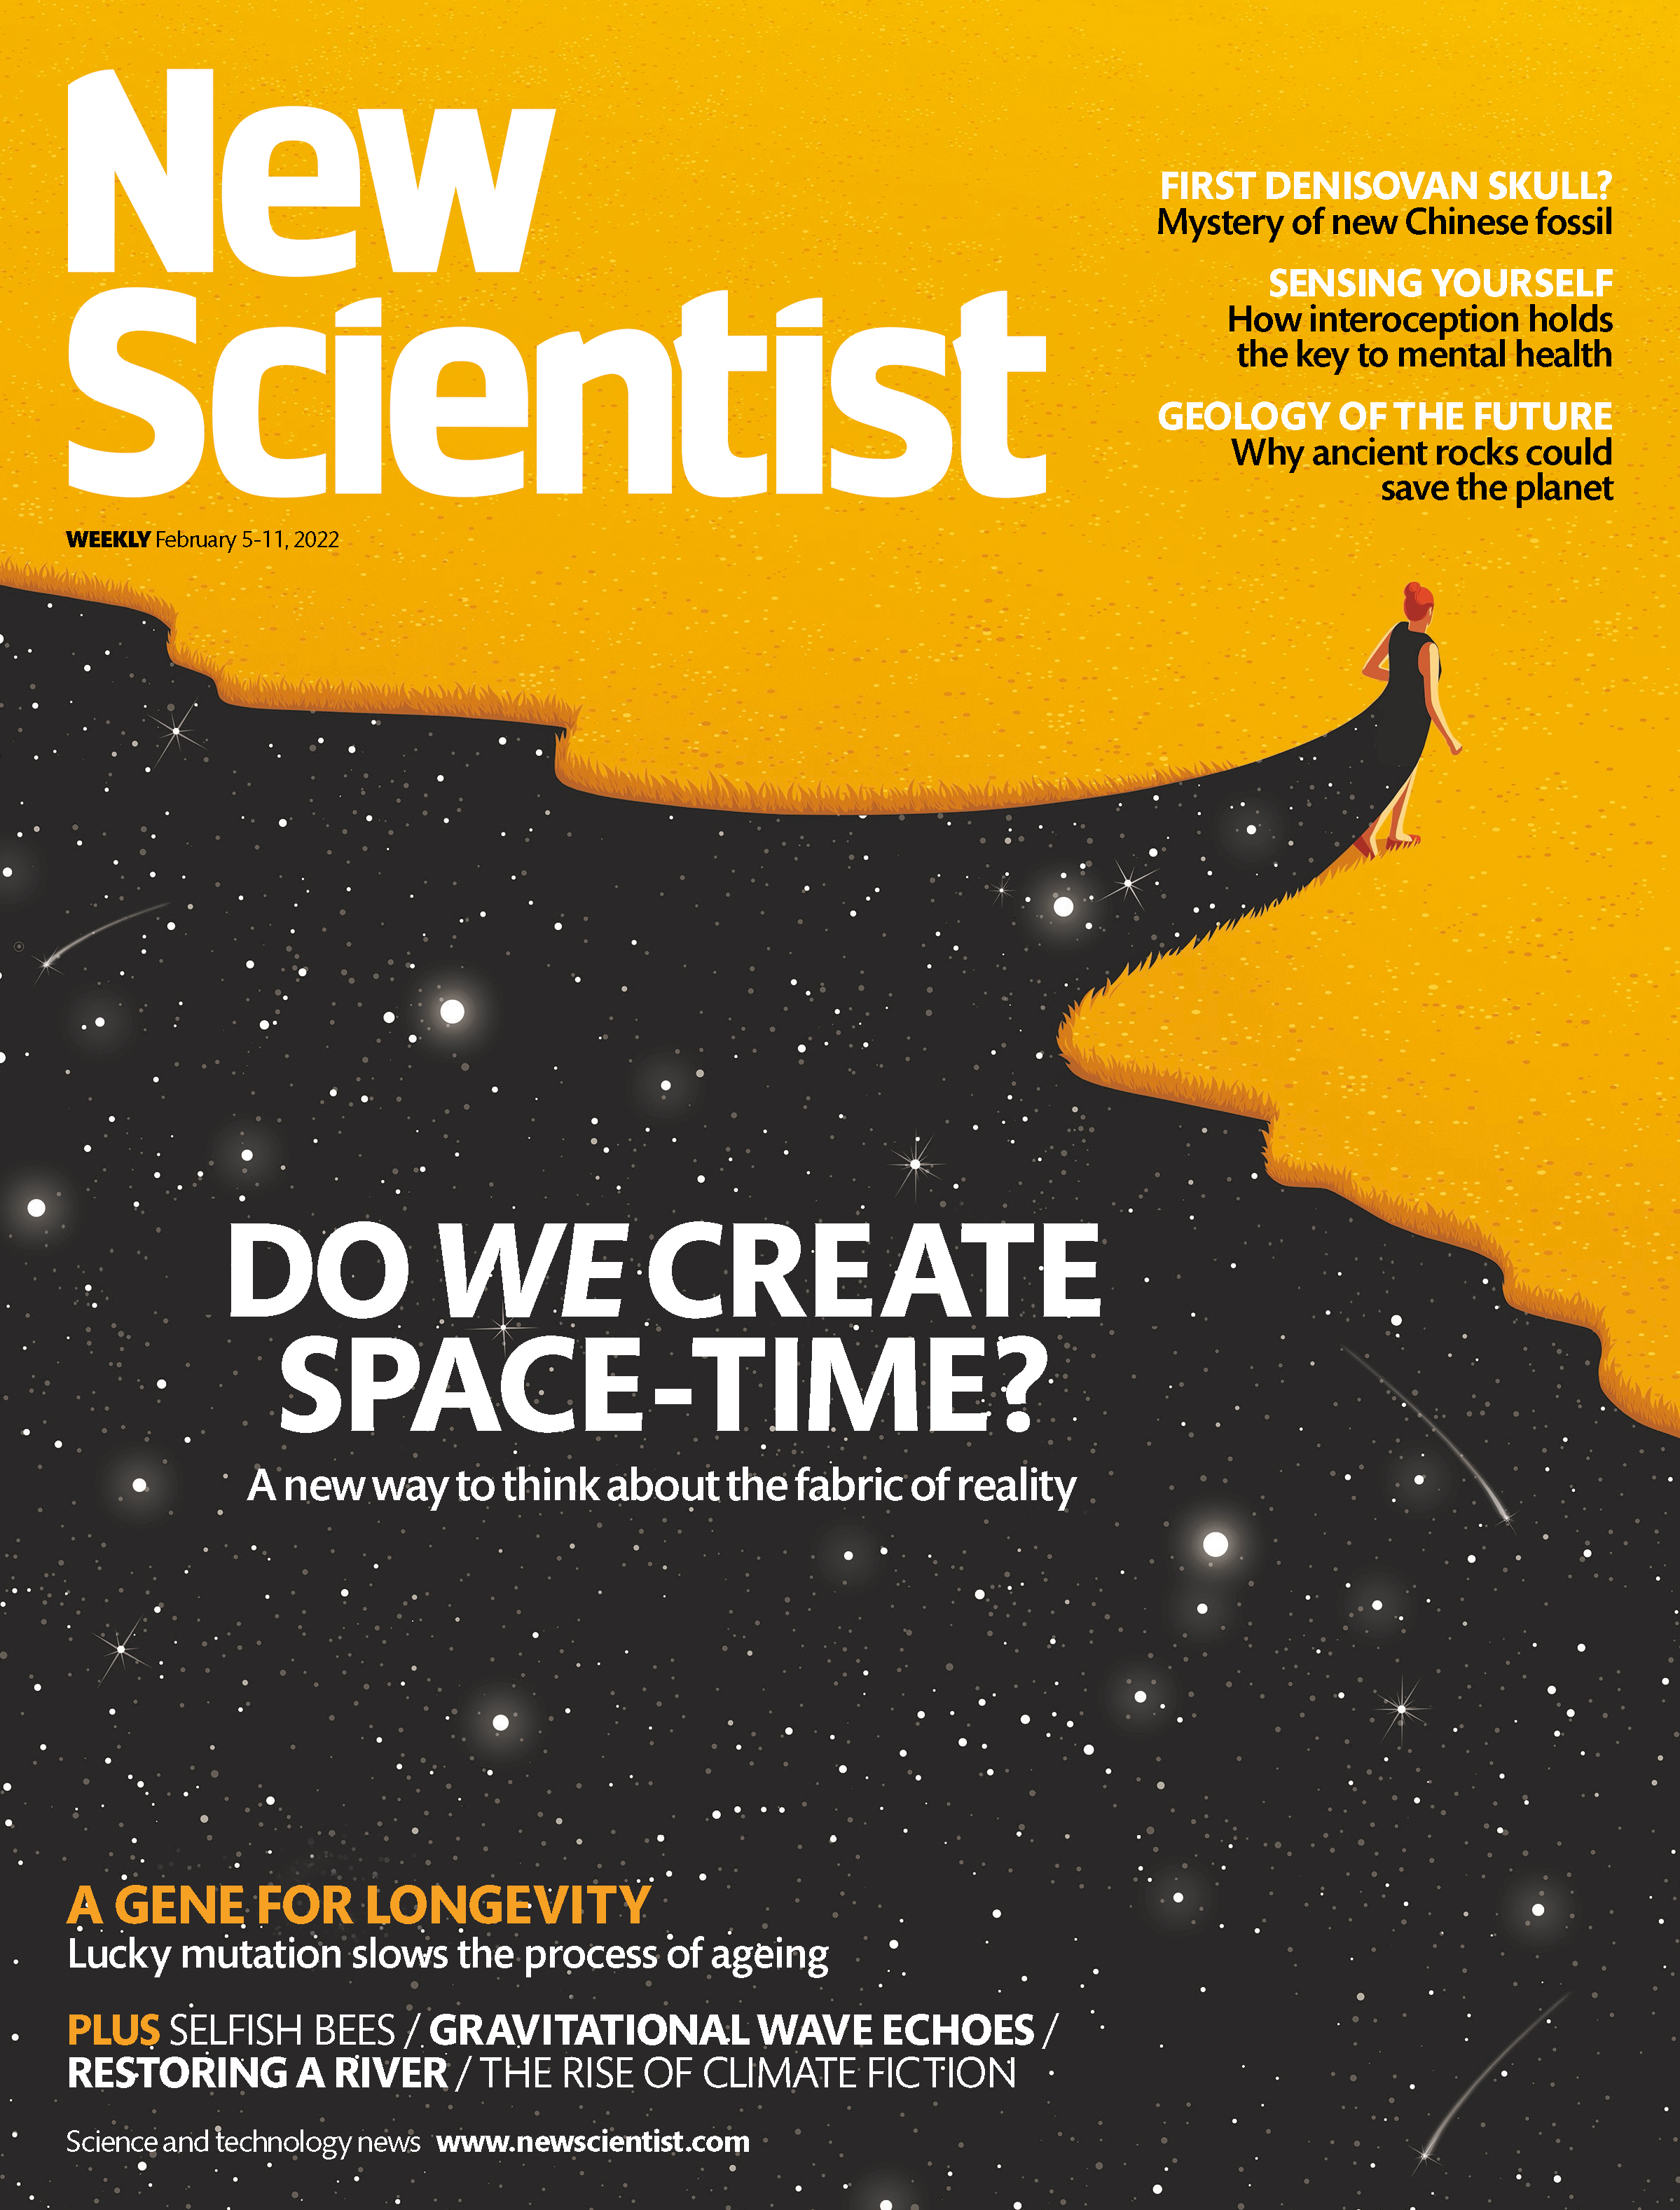 New Scientist “Do We Create Space-Time?” February 5–11, 2022